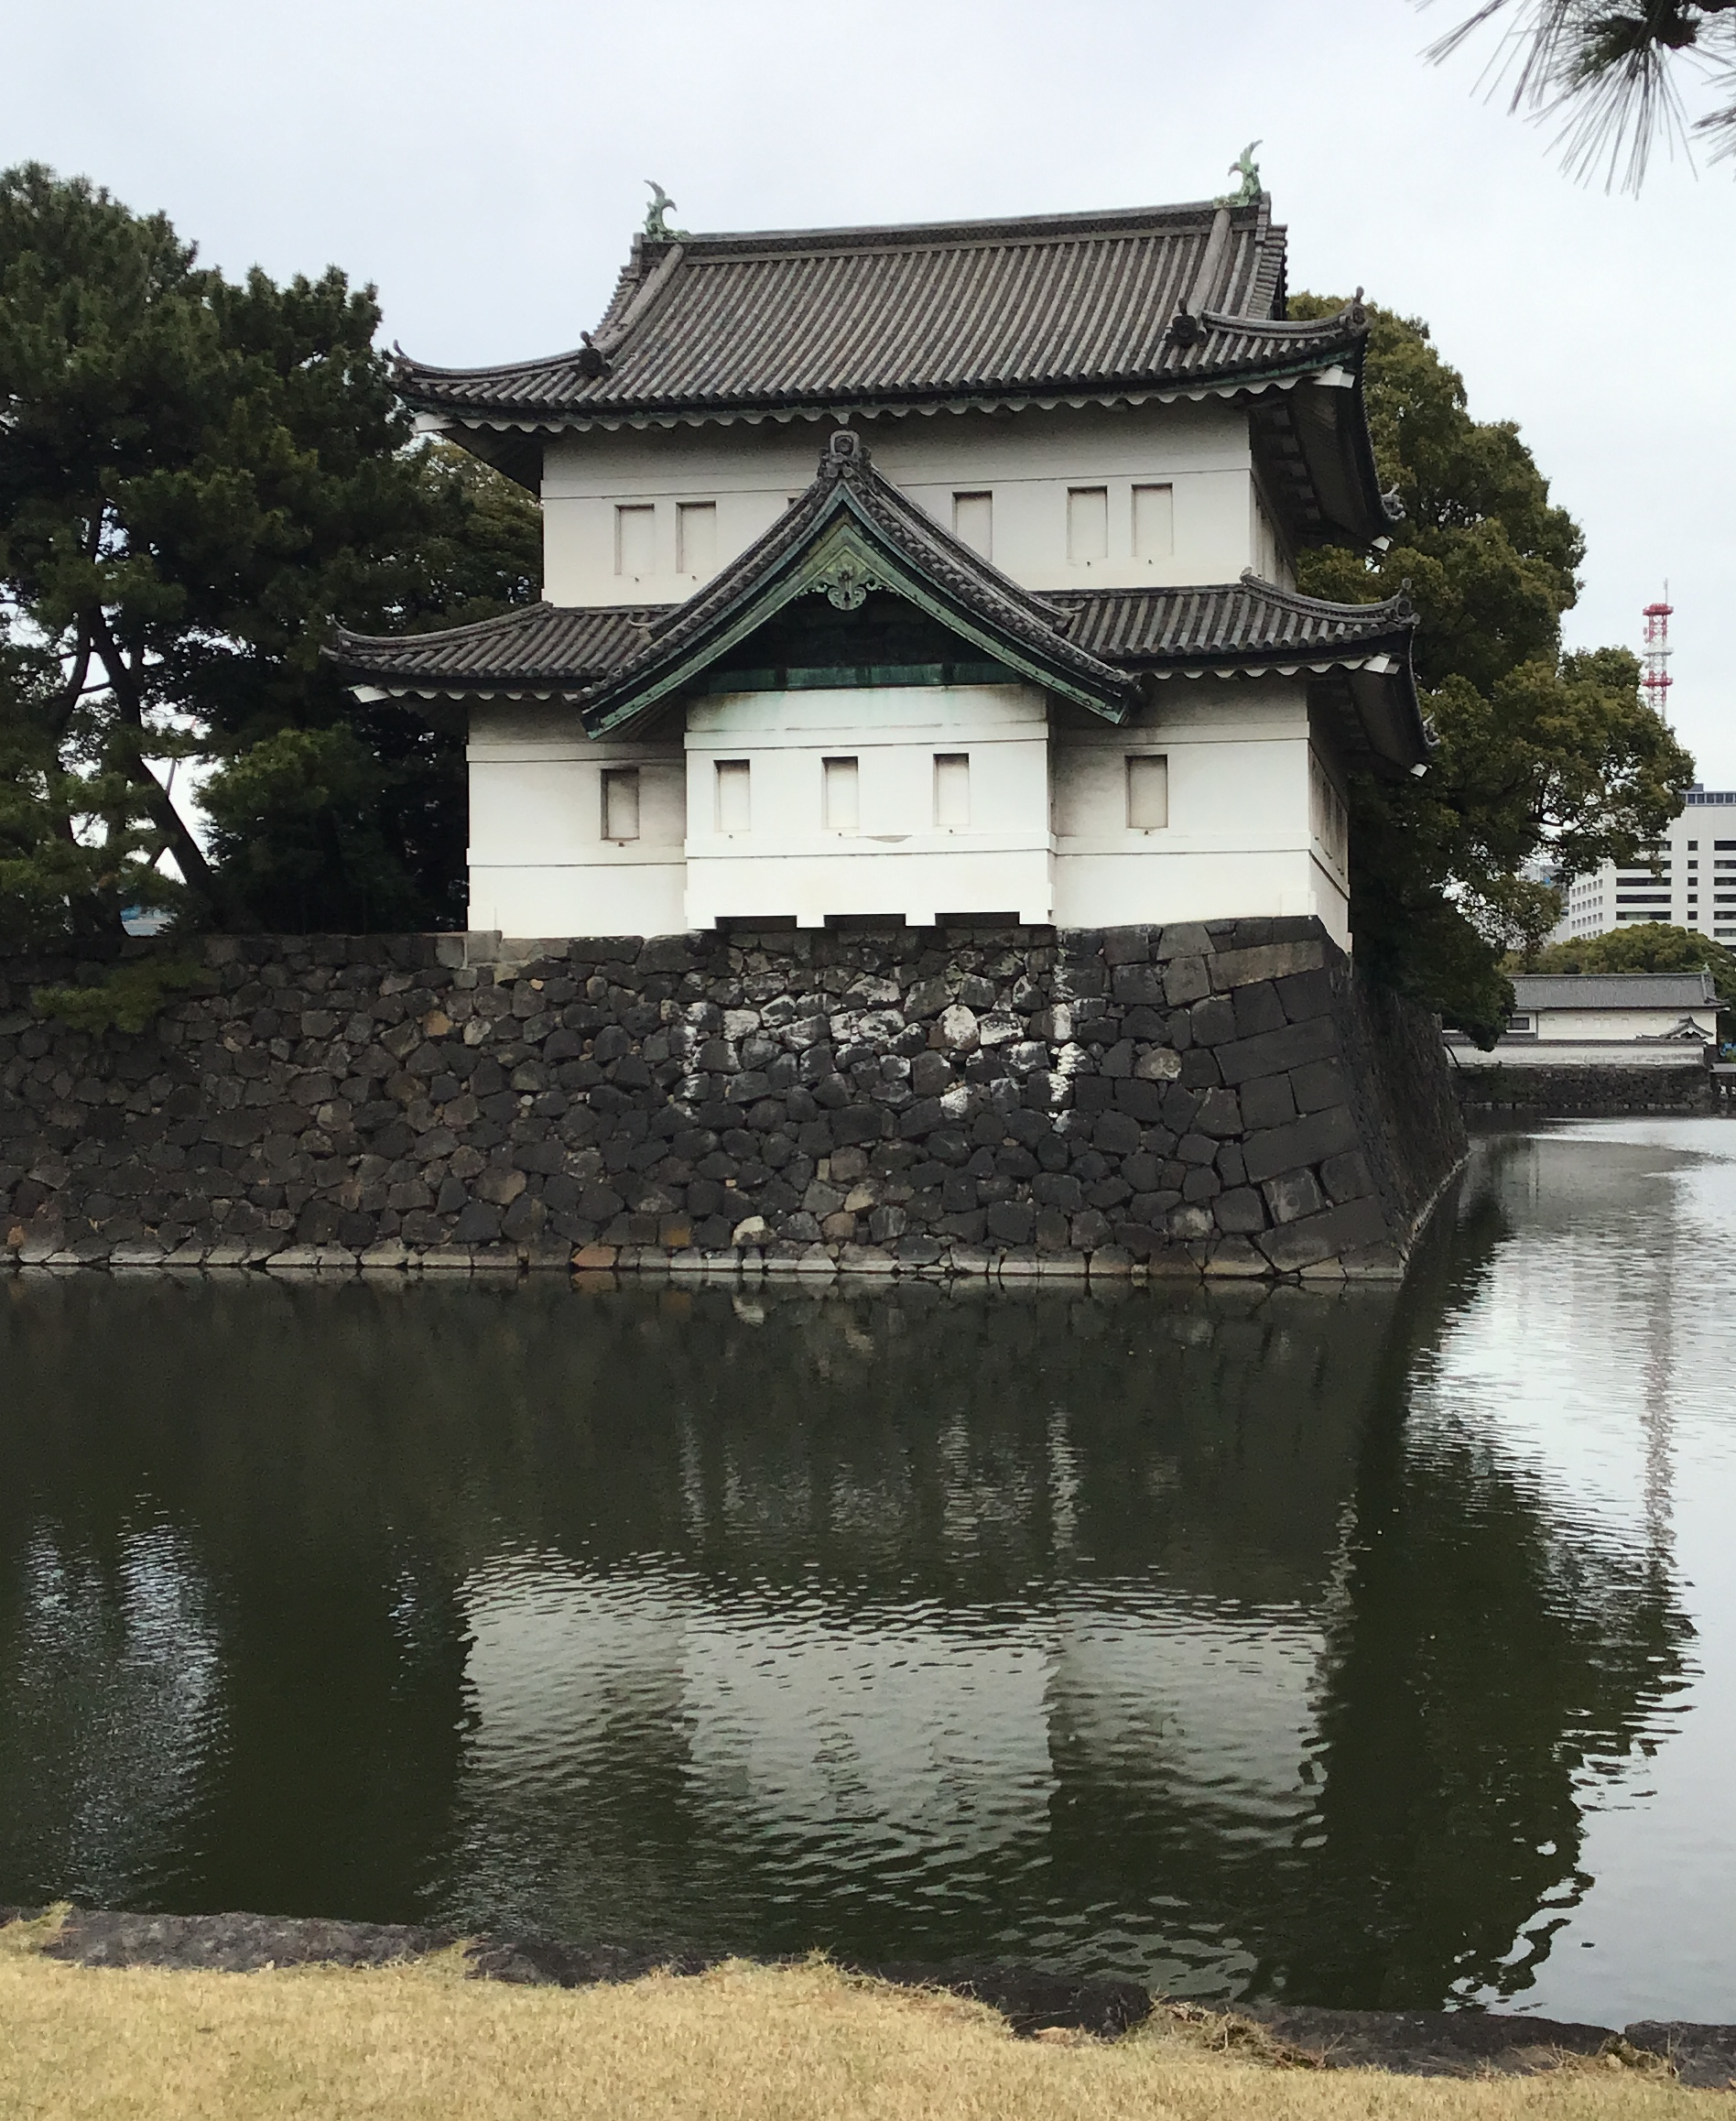 A guard tower at the imperial palace